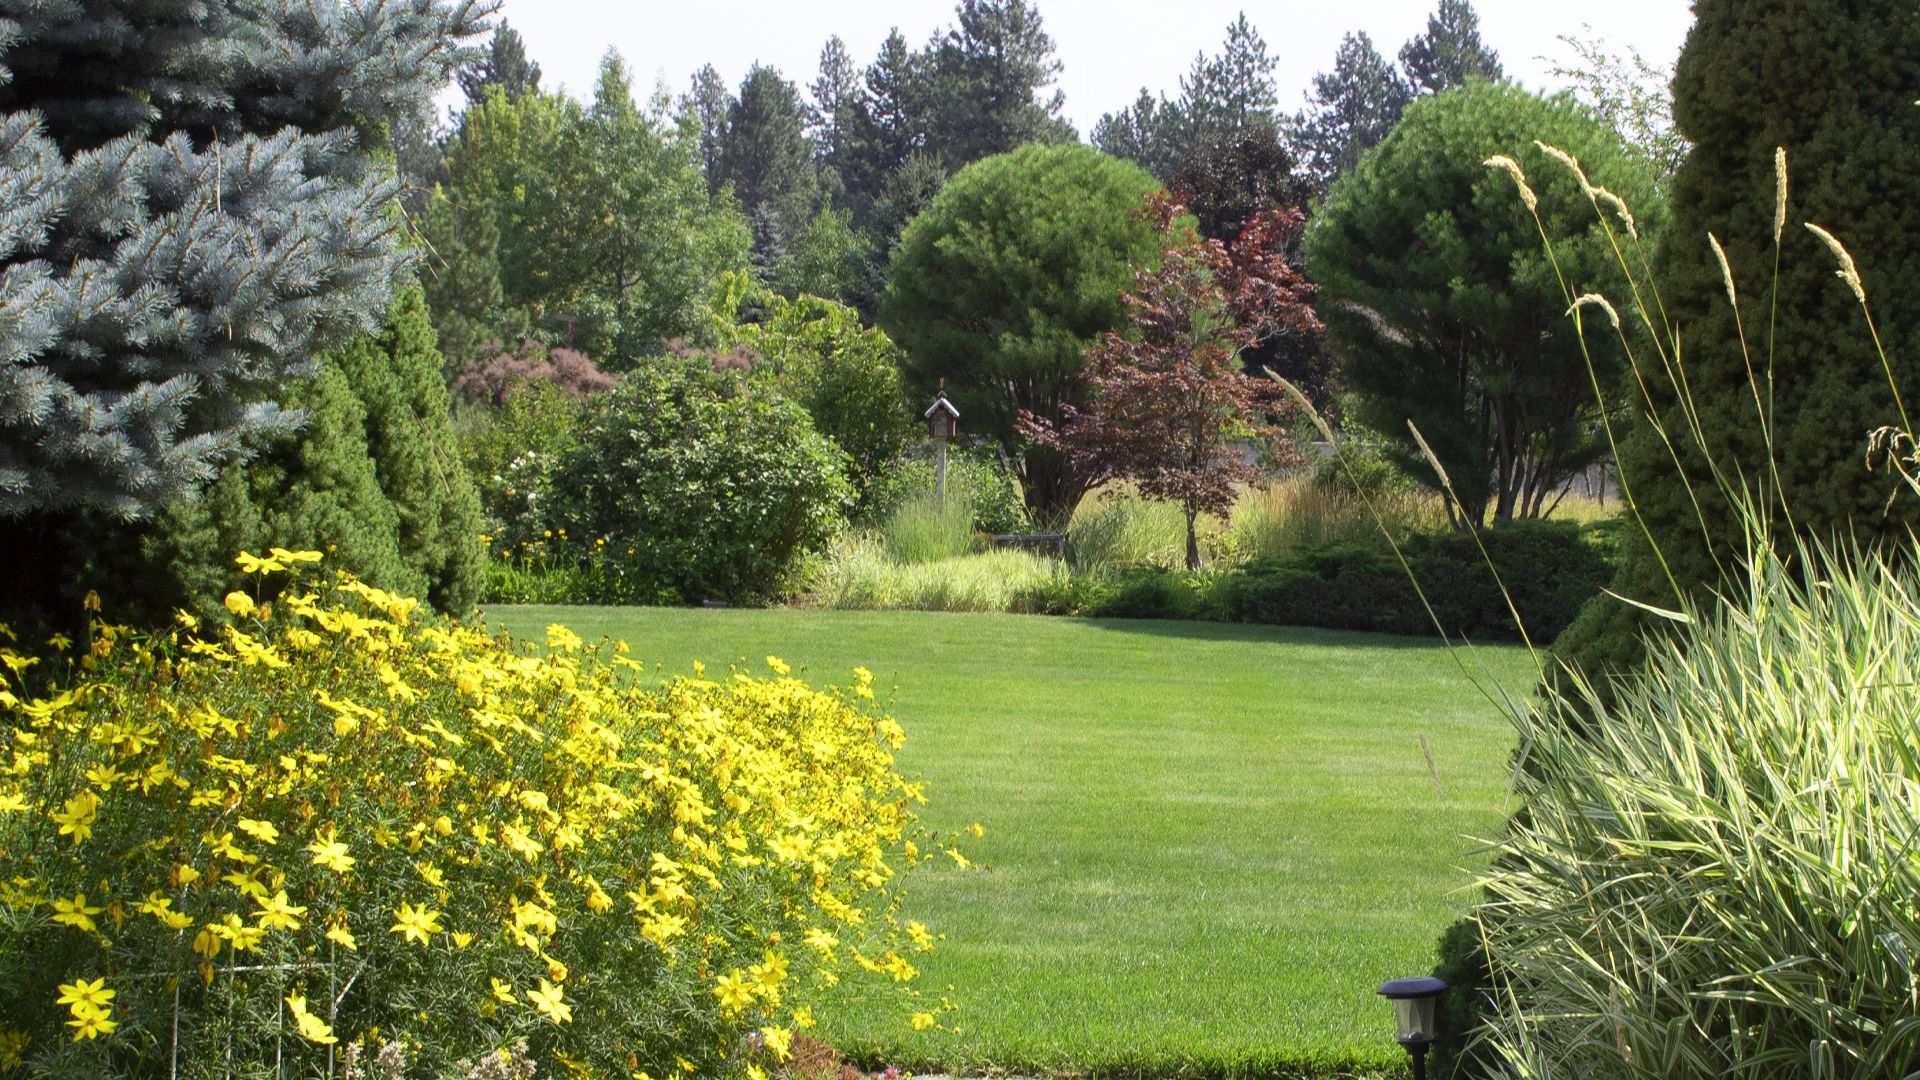 Our lawn care and disease control treatments help this lawn in Liberty Lake, WA stay healthy and green.